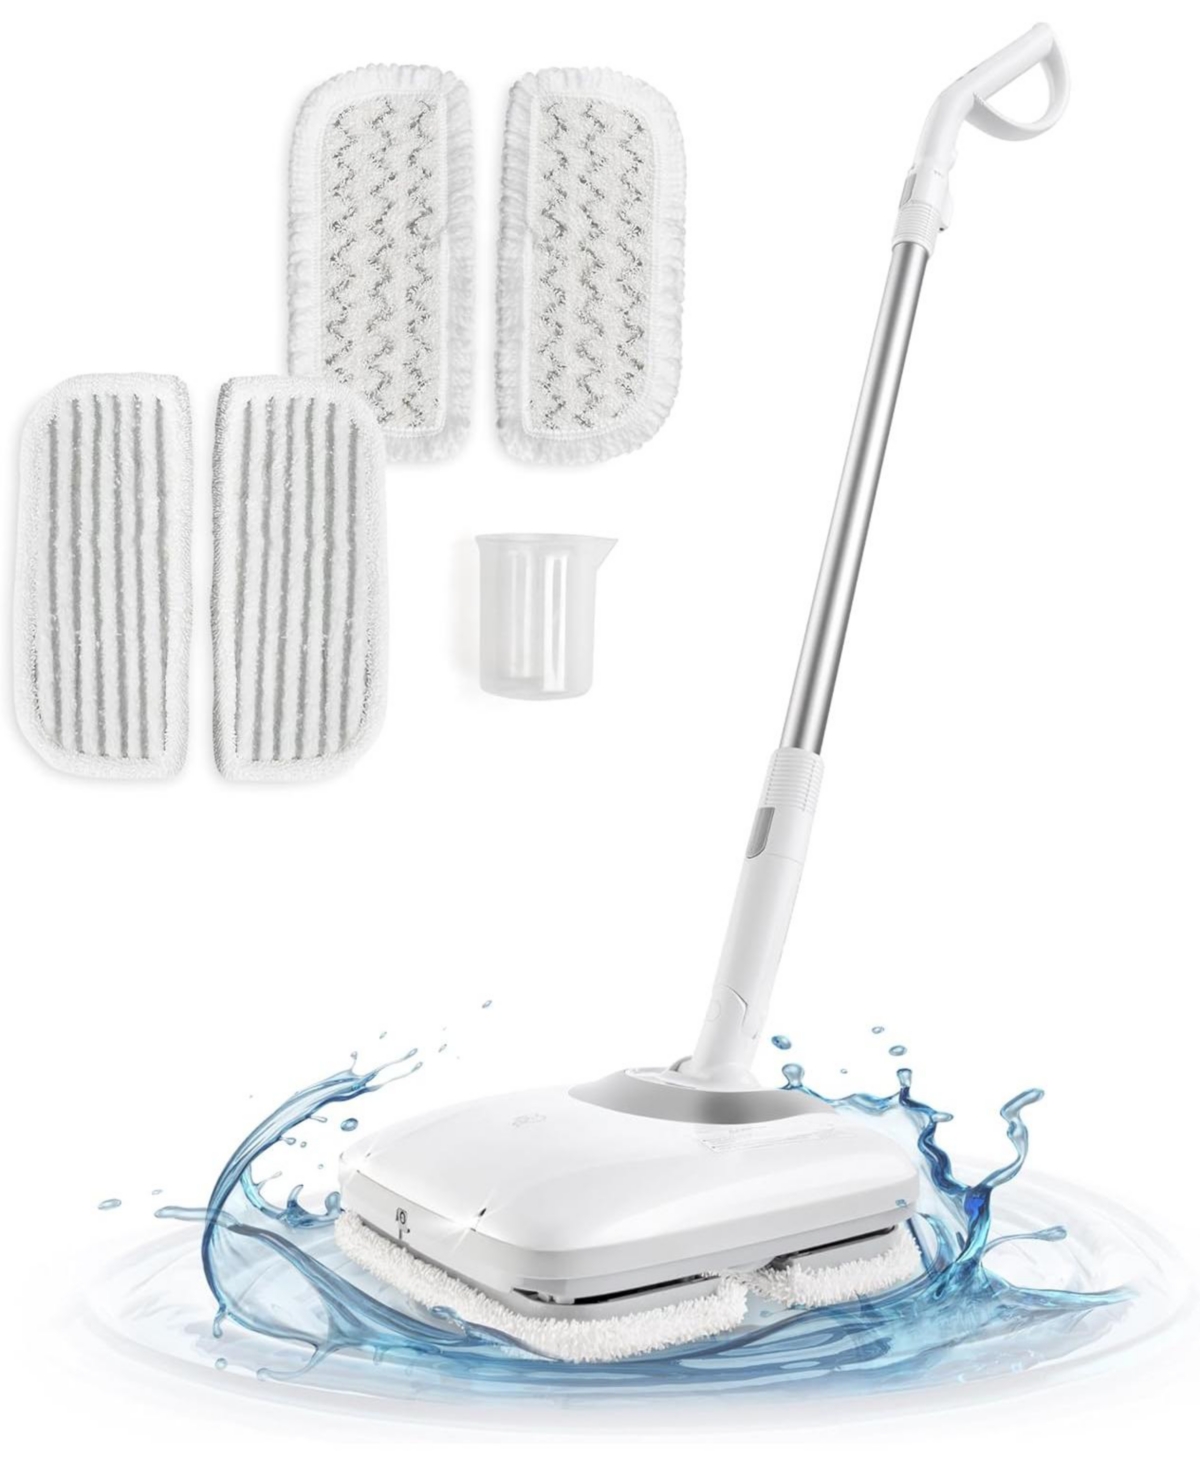 Rechargeable Cordless Electric Vibrating Mop with Water Spray with Four Reusable Cleaning Pads - White